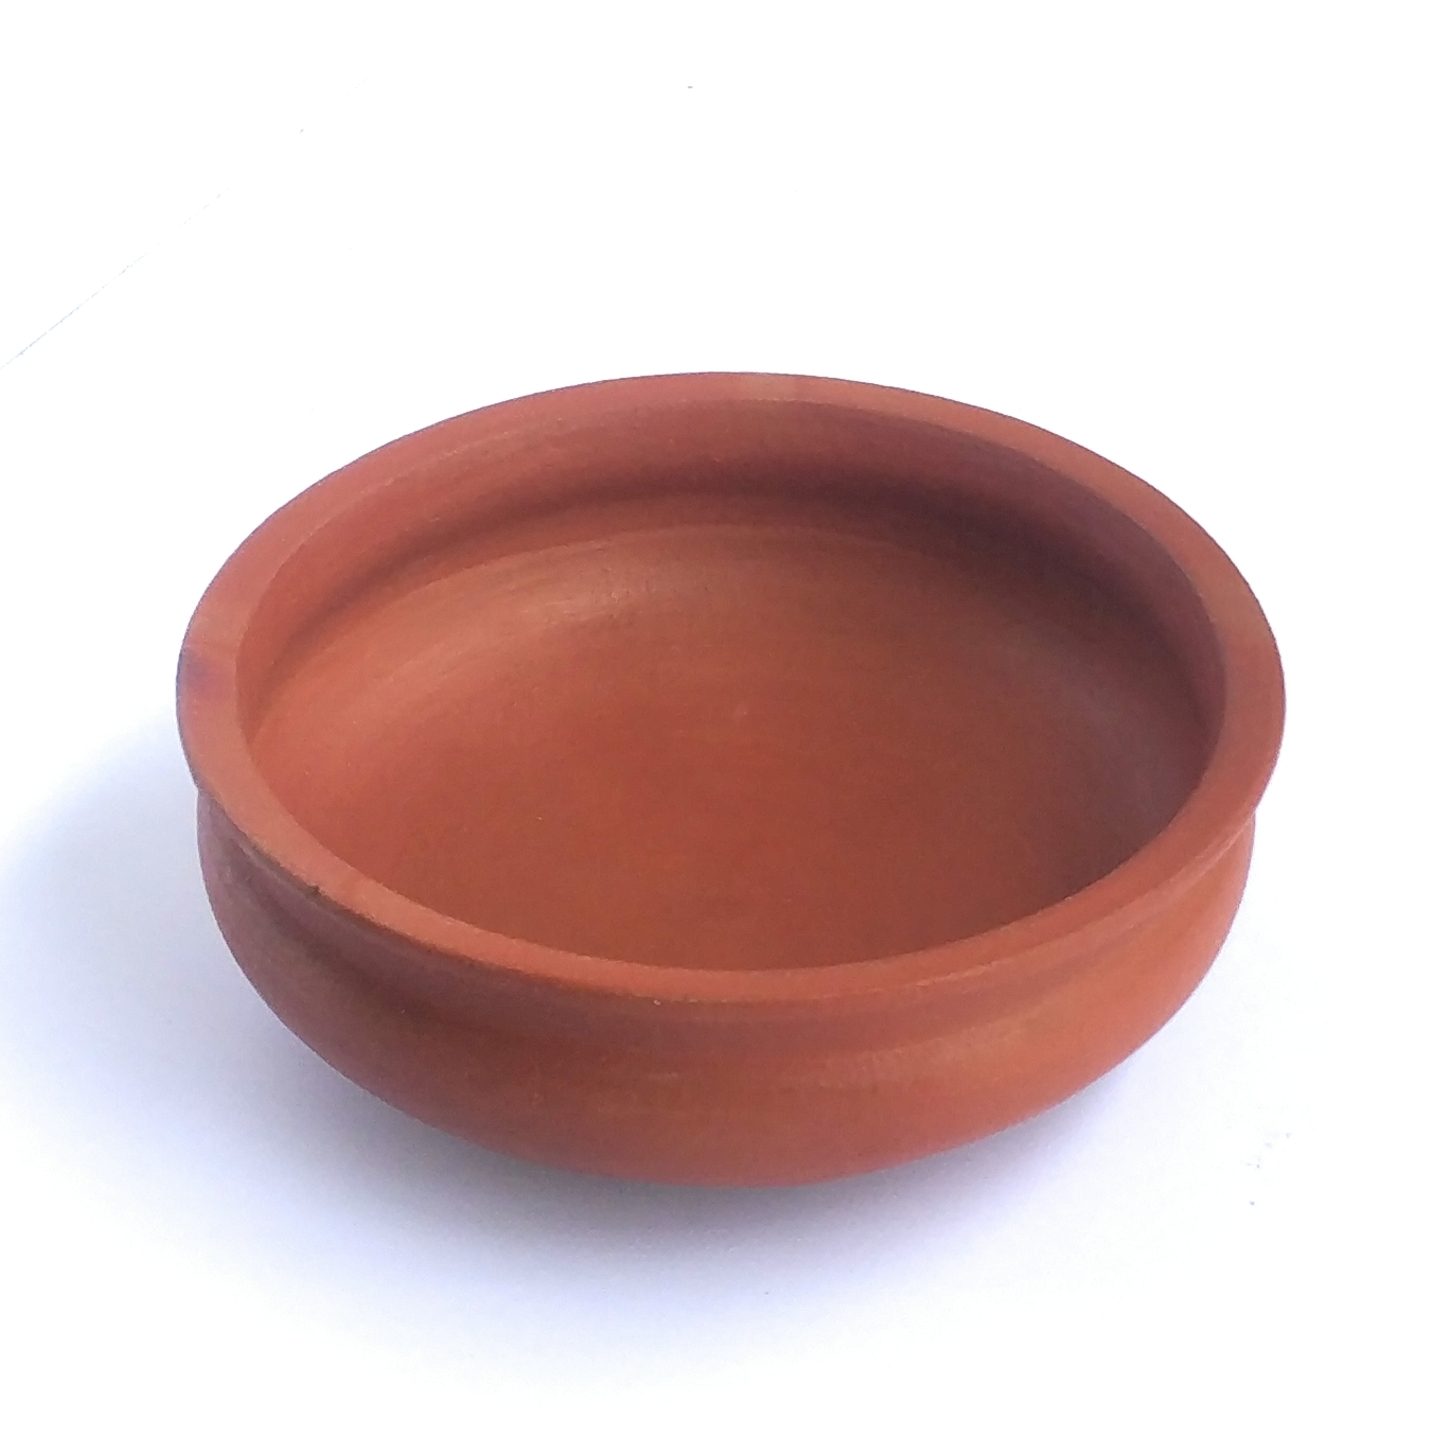 Earthling All Natural Pre-Seasoned Clay Cooking Pot 10 inch